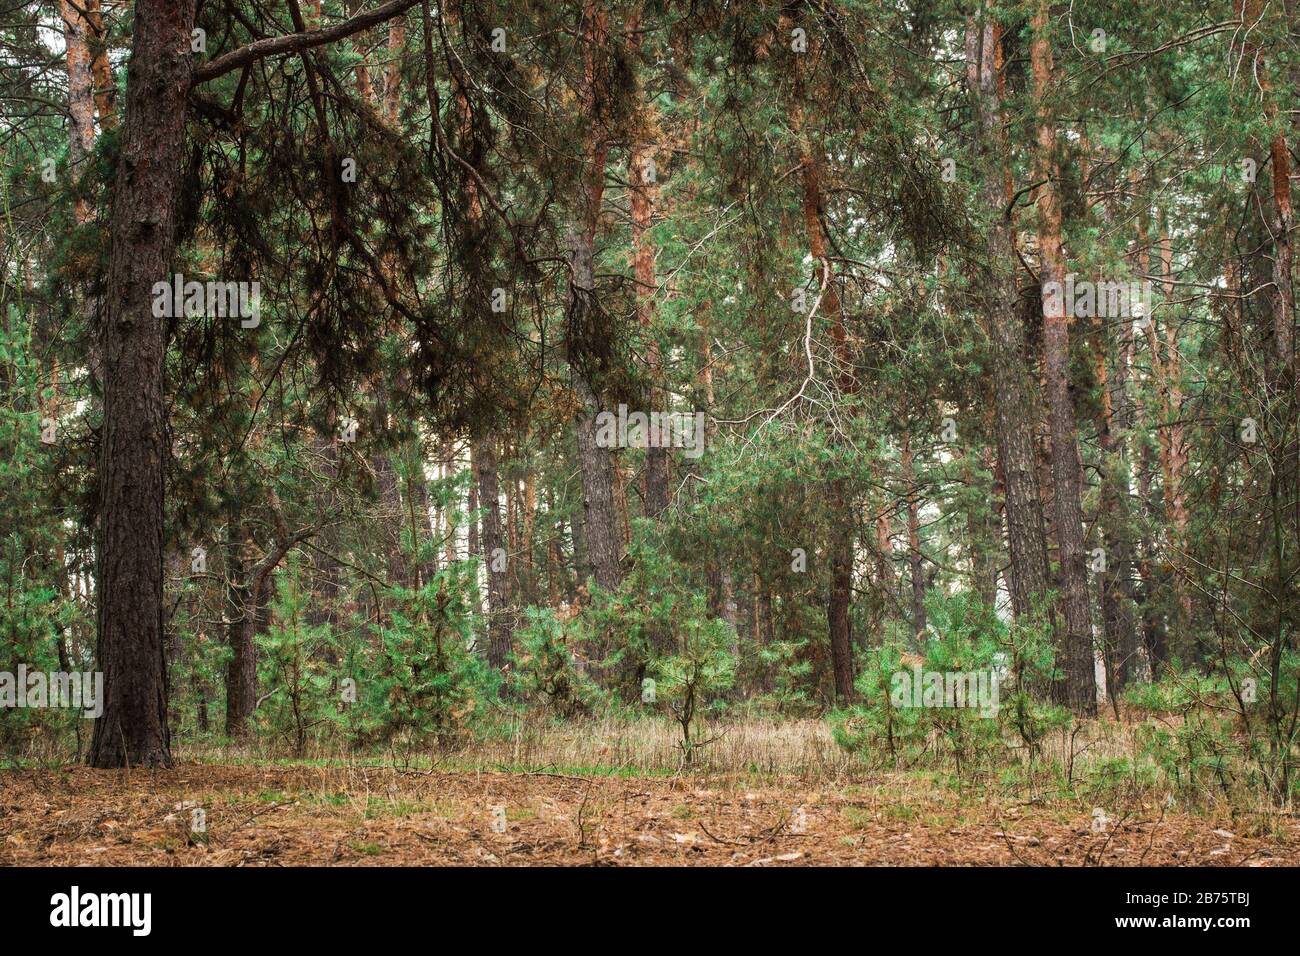 young shift with fluffy branches of high pine trees in a beautiful forest Stock Photo